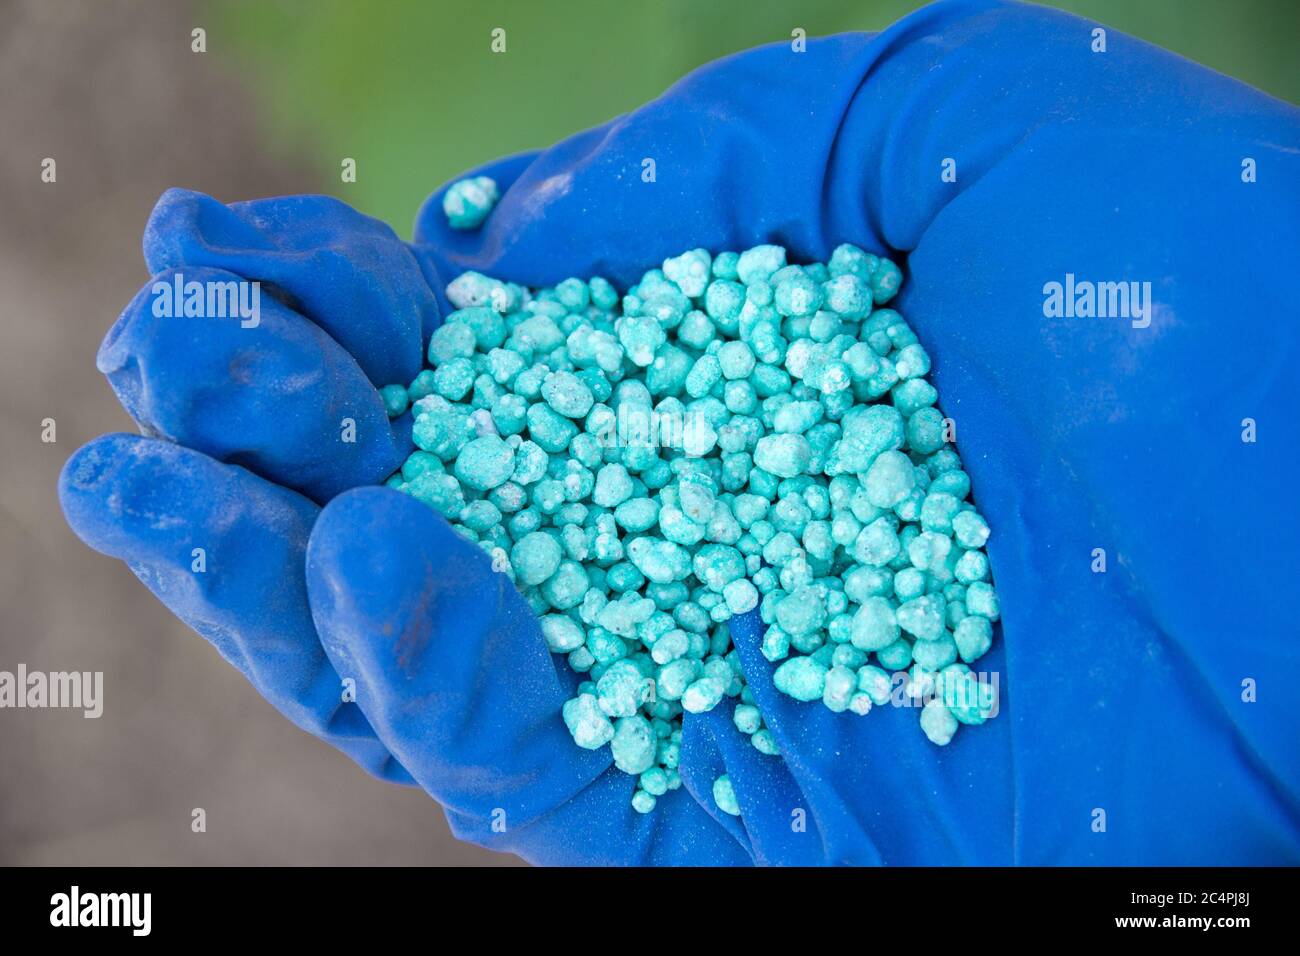 Blue different shape chemical fertilizer granules in human's hand. Stock Photo